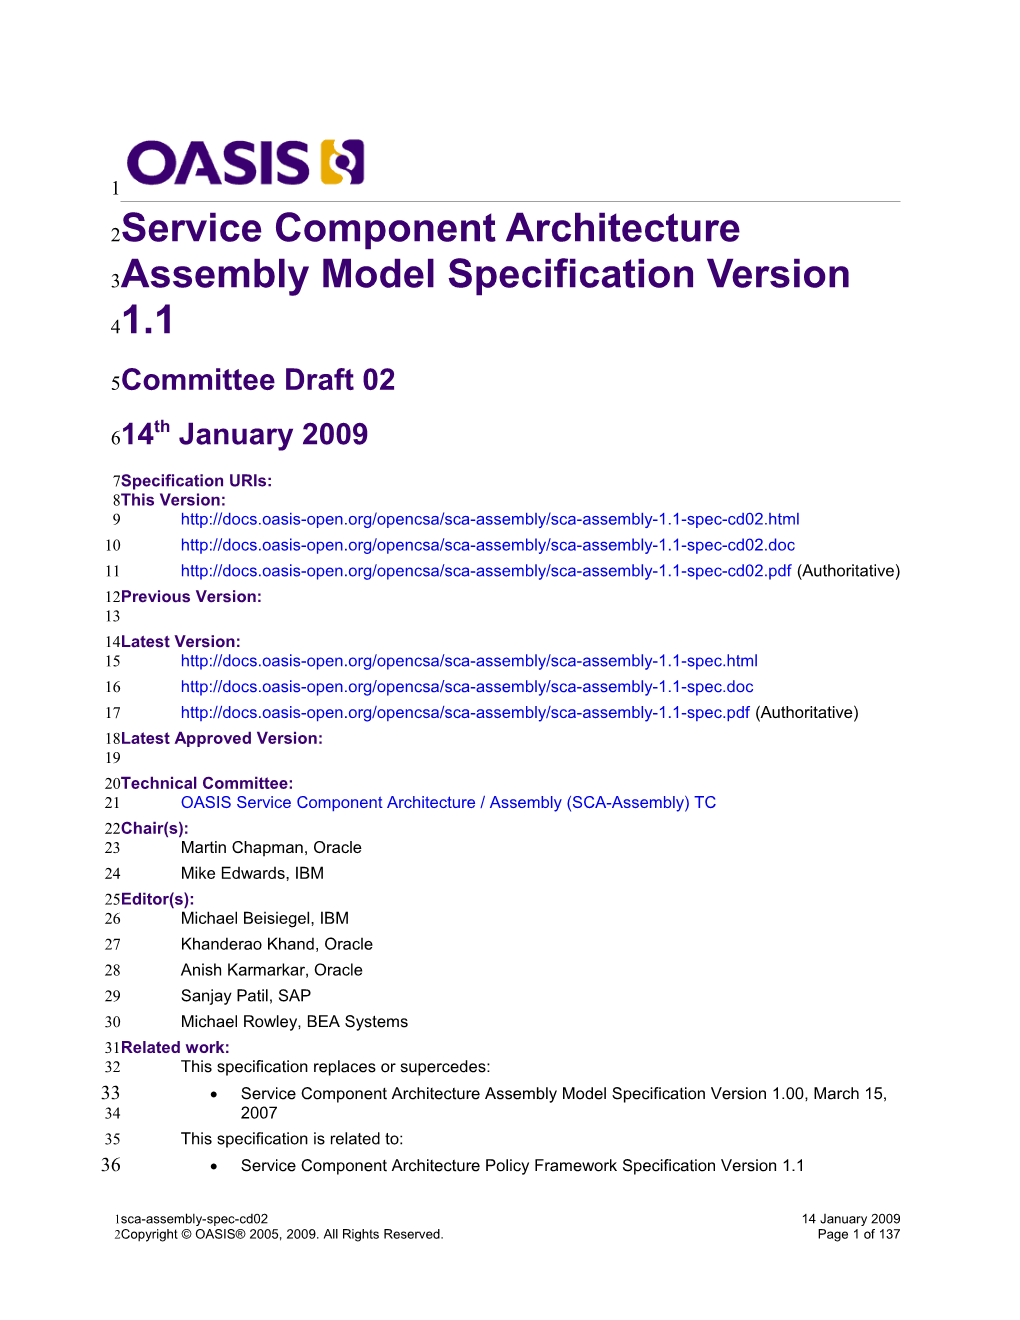 Service Component Architecture Assembly Model Specification Version 1.1